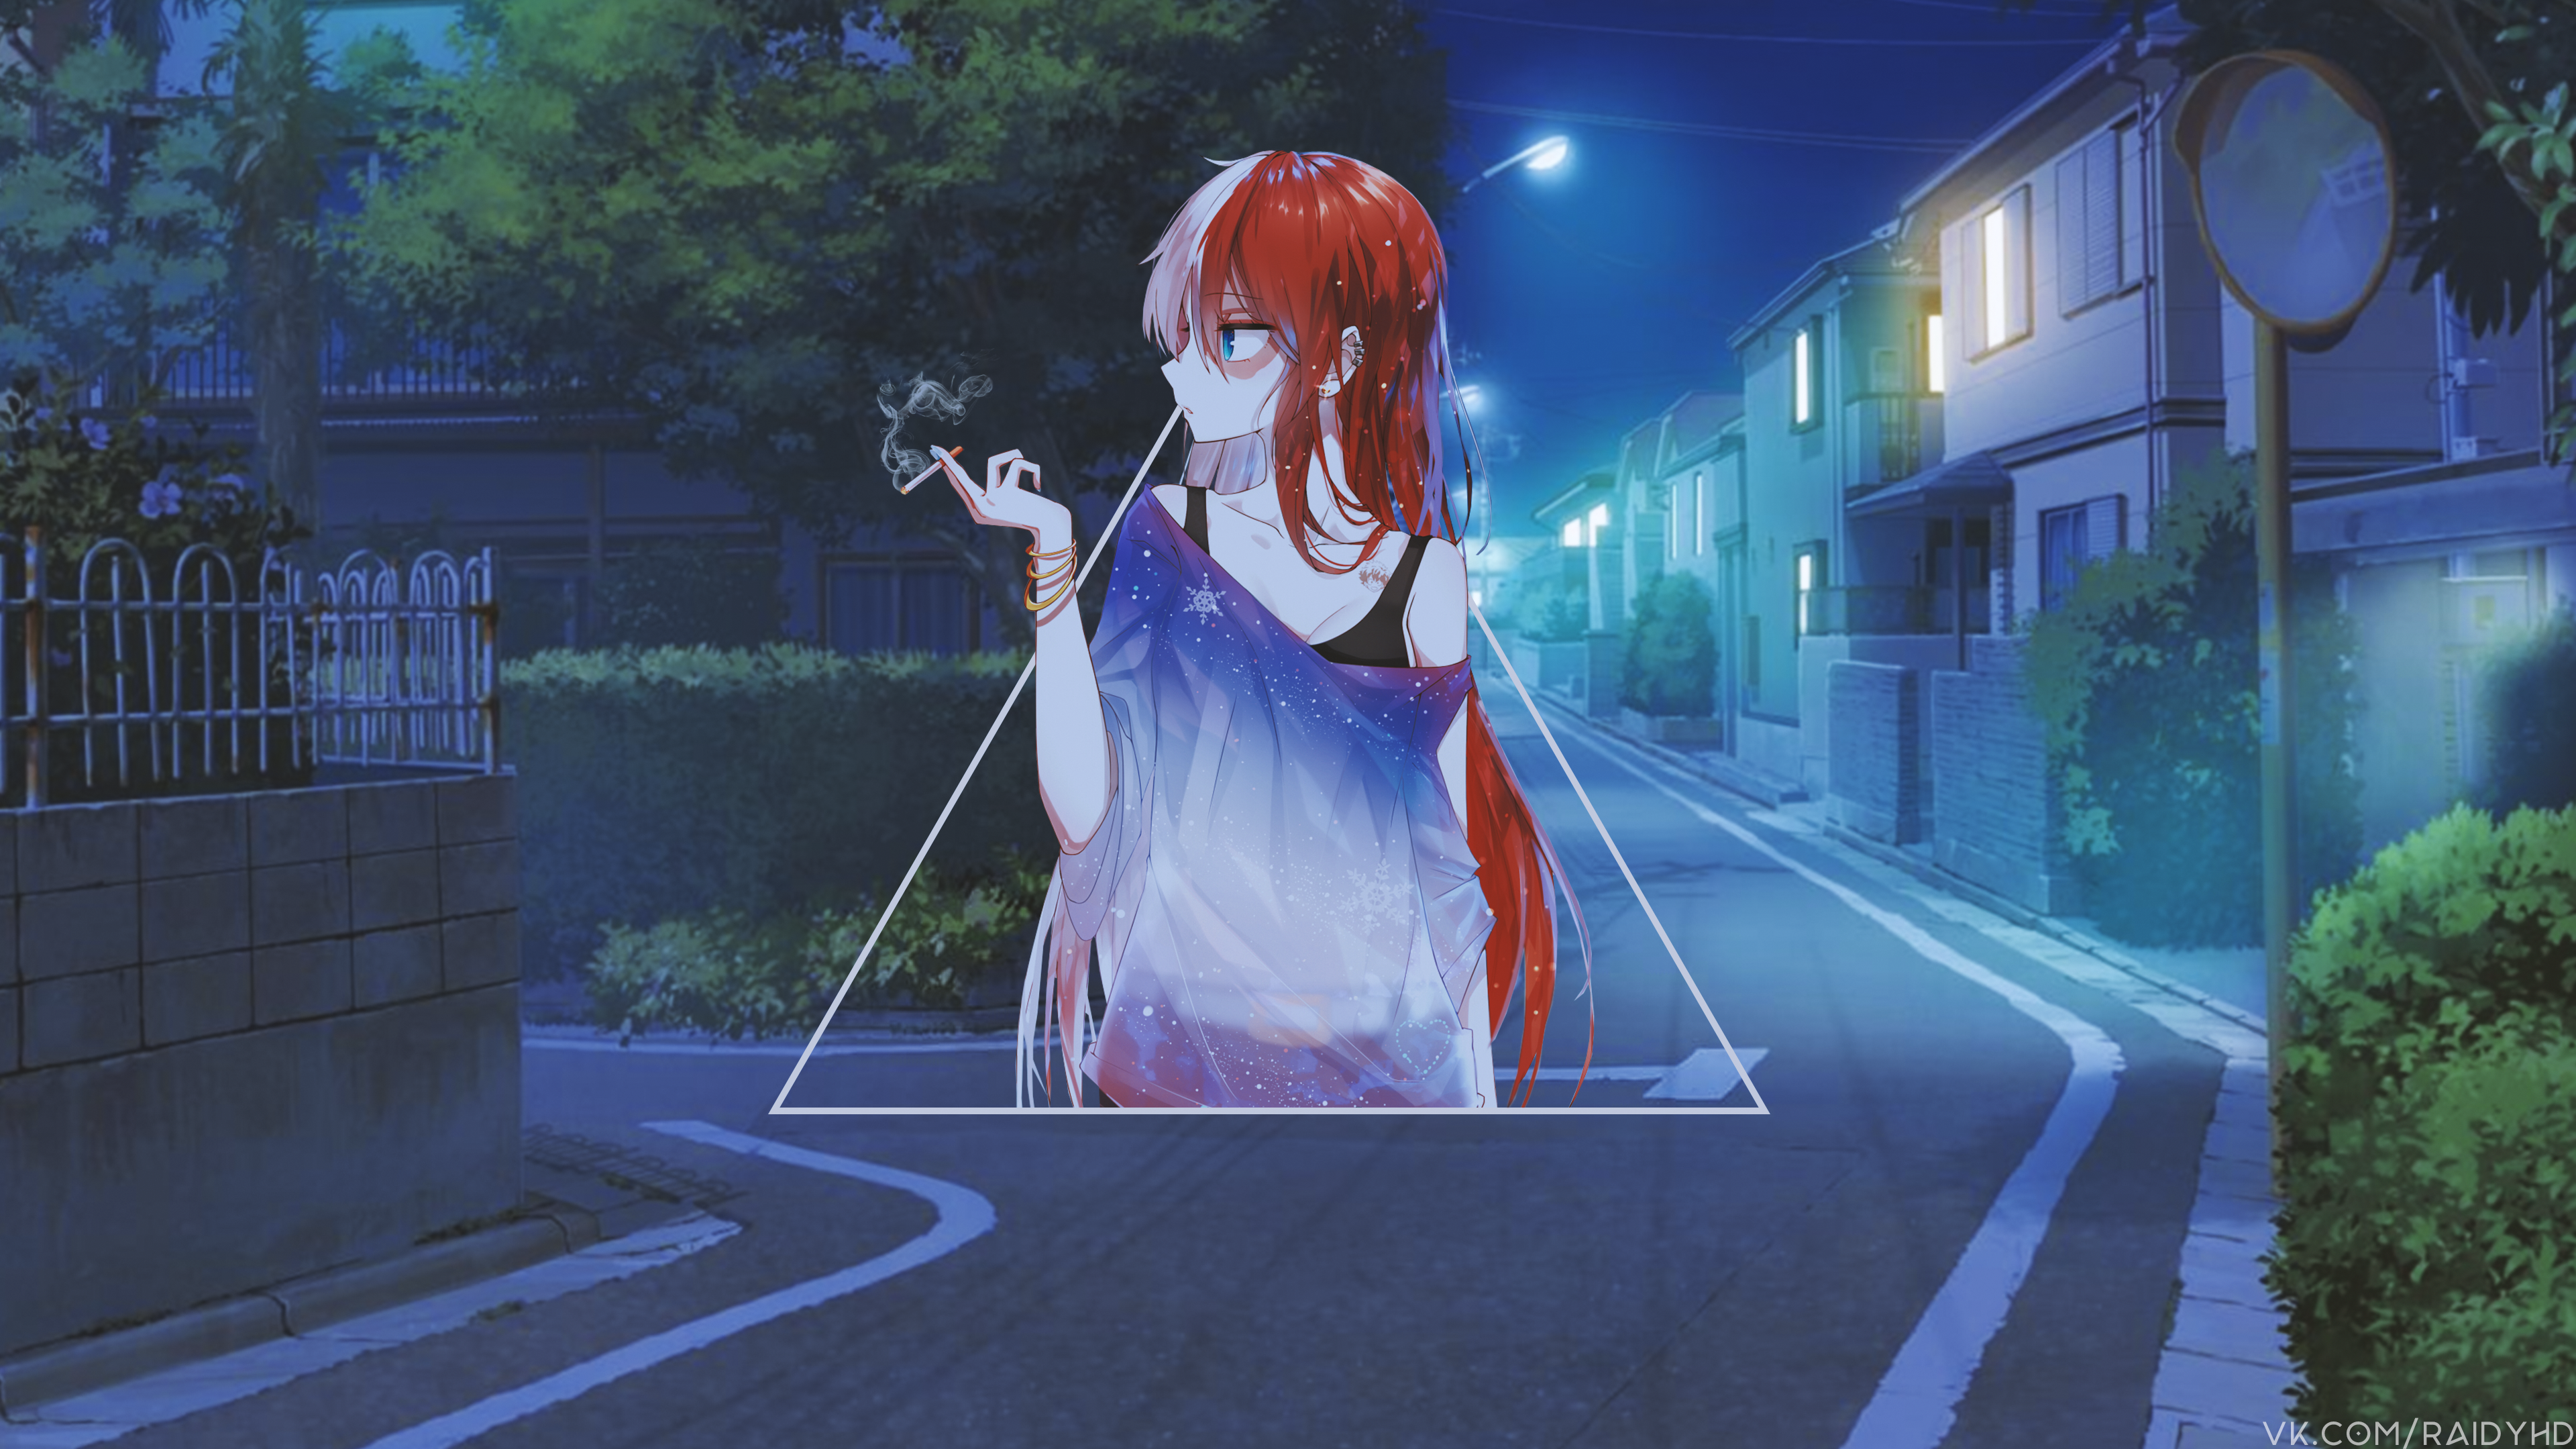 Anime 3840x2160 anime anime girls picture-in-picture night redhead smoking urban